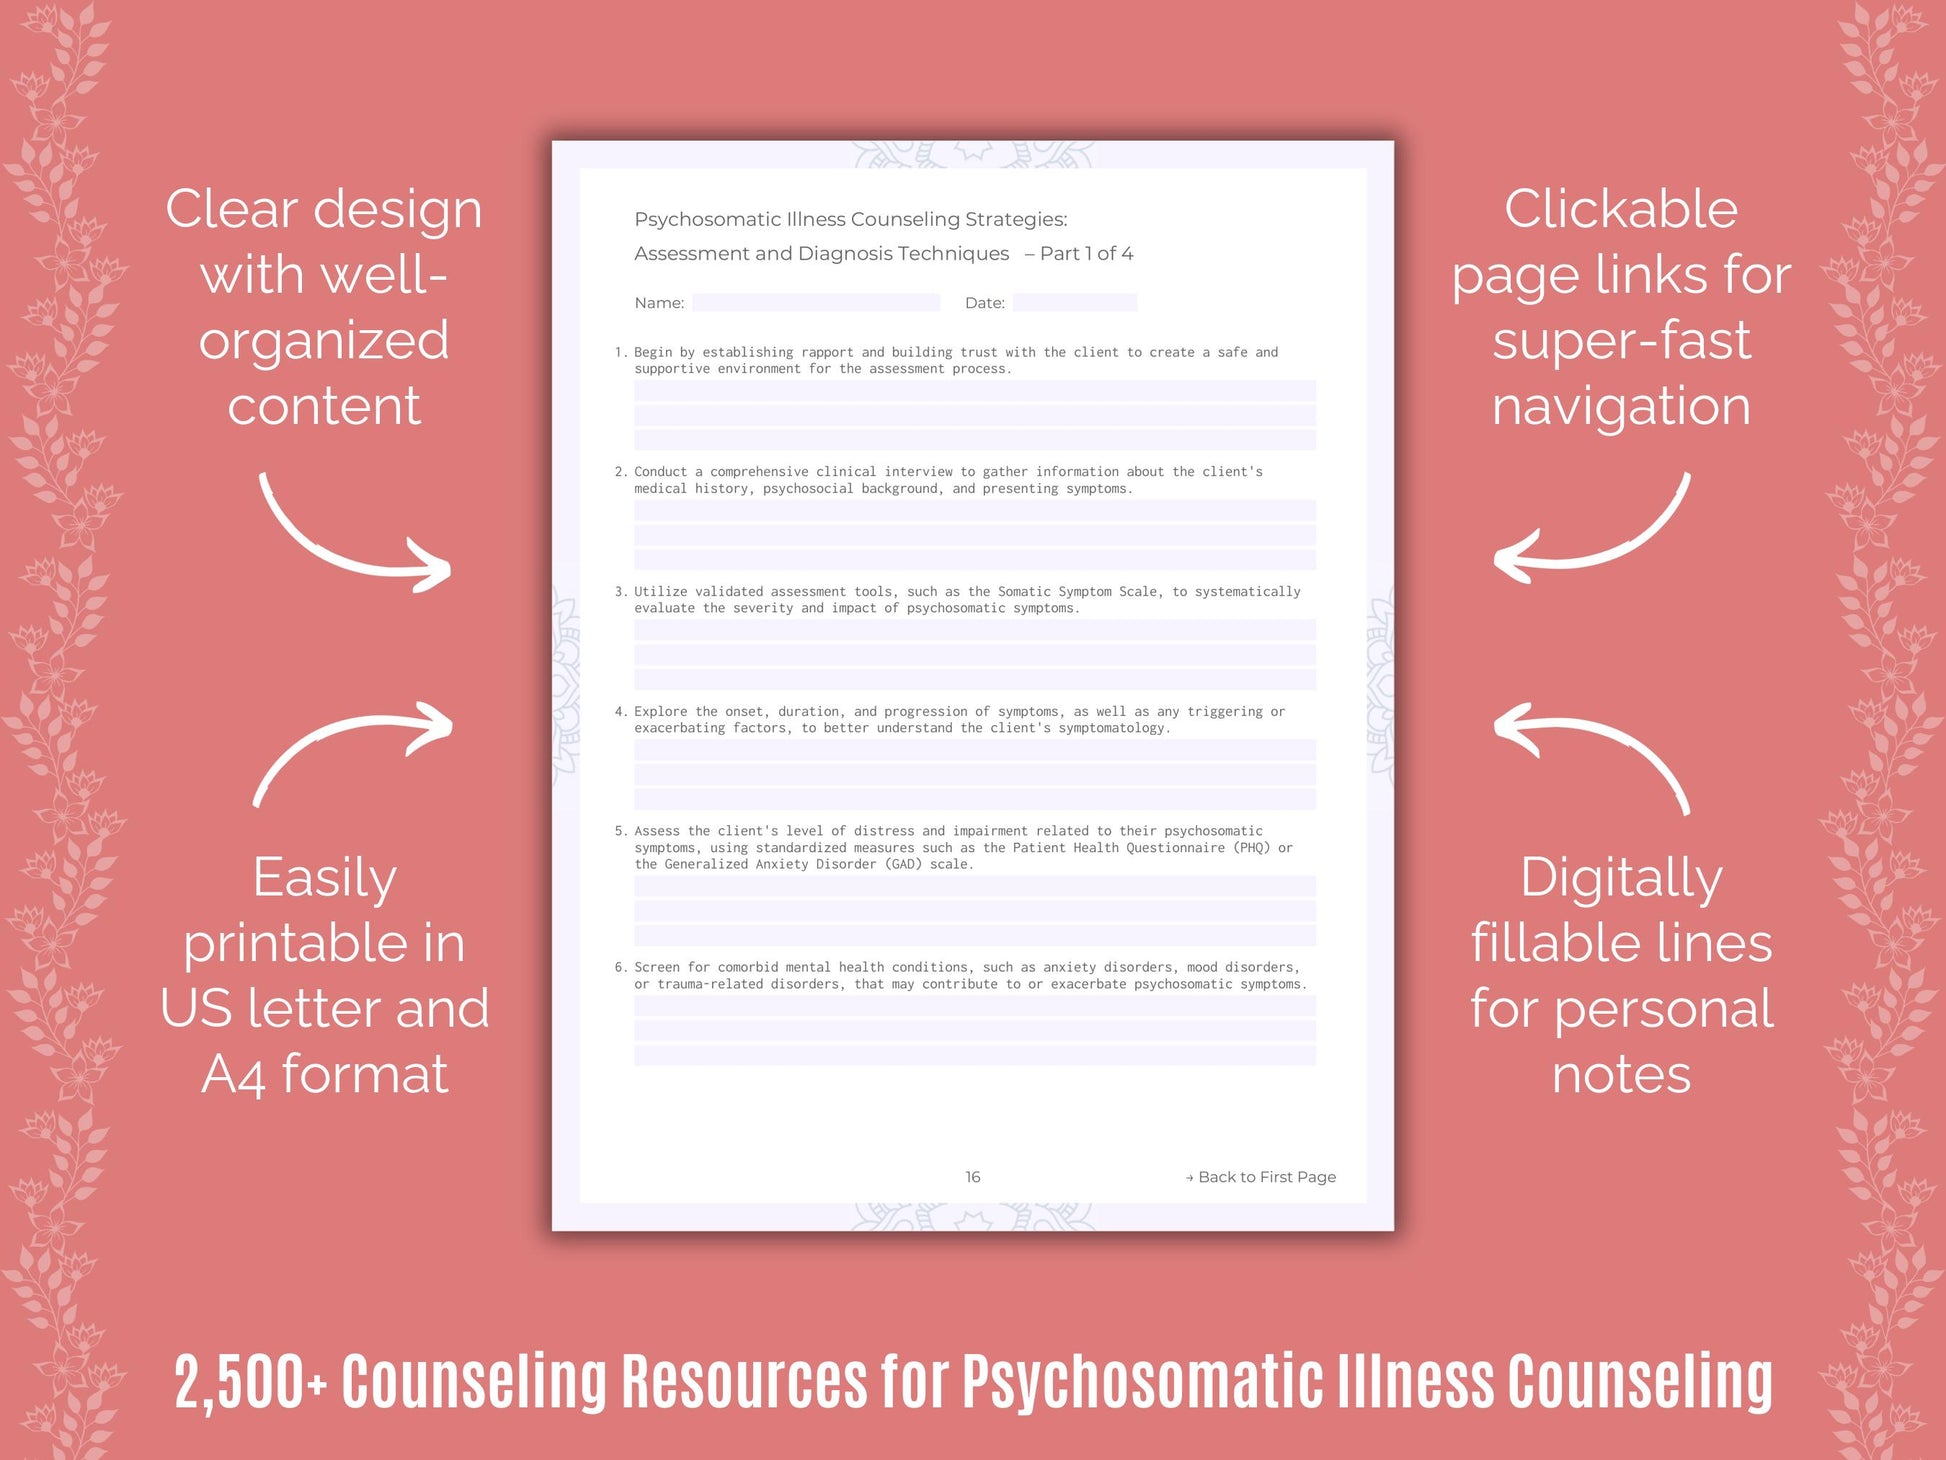 Template, Resource, Illness, Counselor, Counseling, Worksheet, Psychosomatic, Mental Health, Therapy, Psychosomatic Idea, Workbook, Psychosomatic Bundle, Therapist